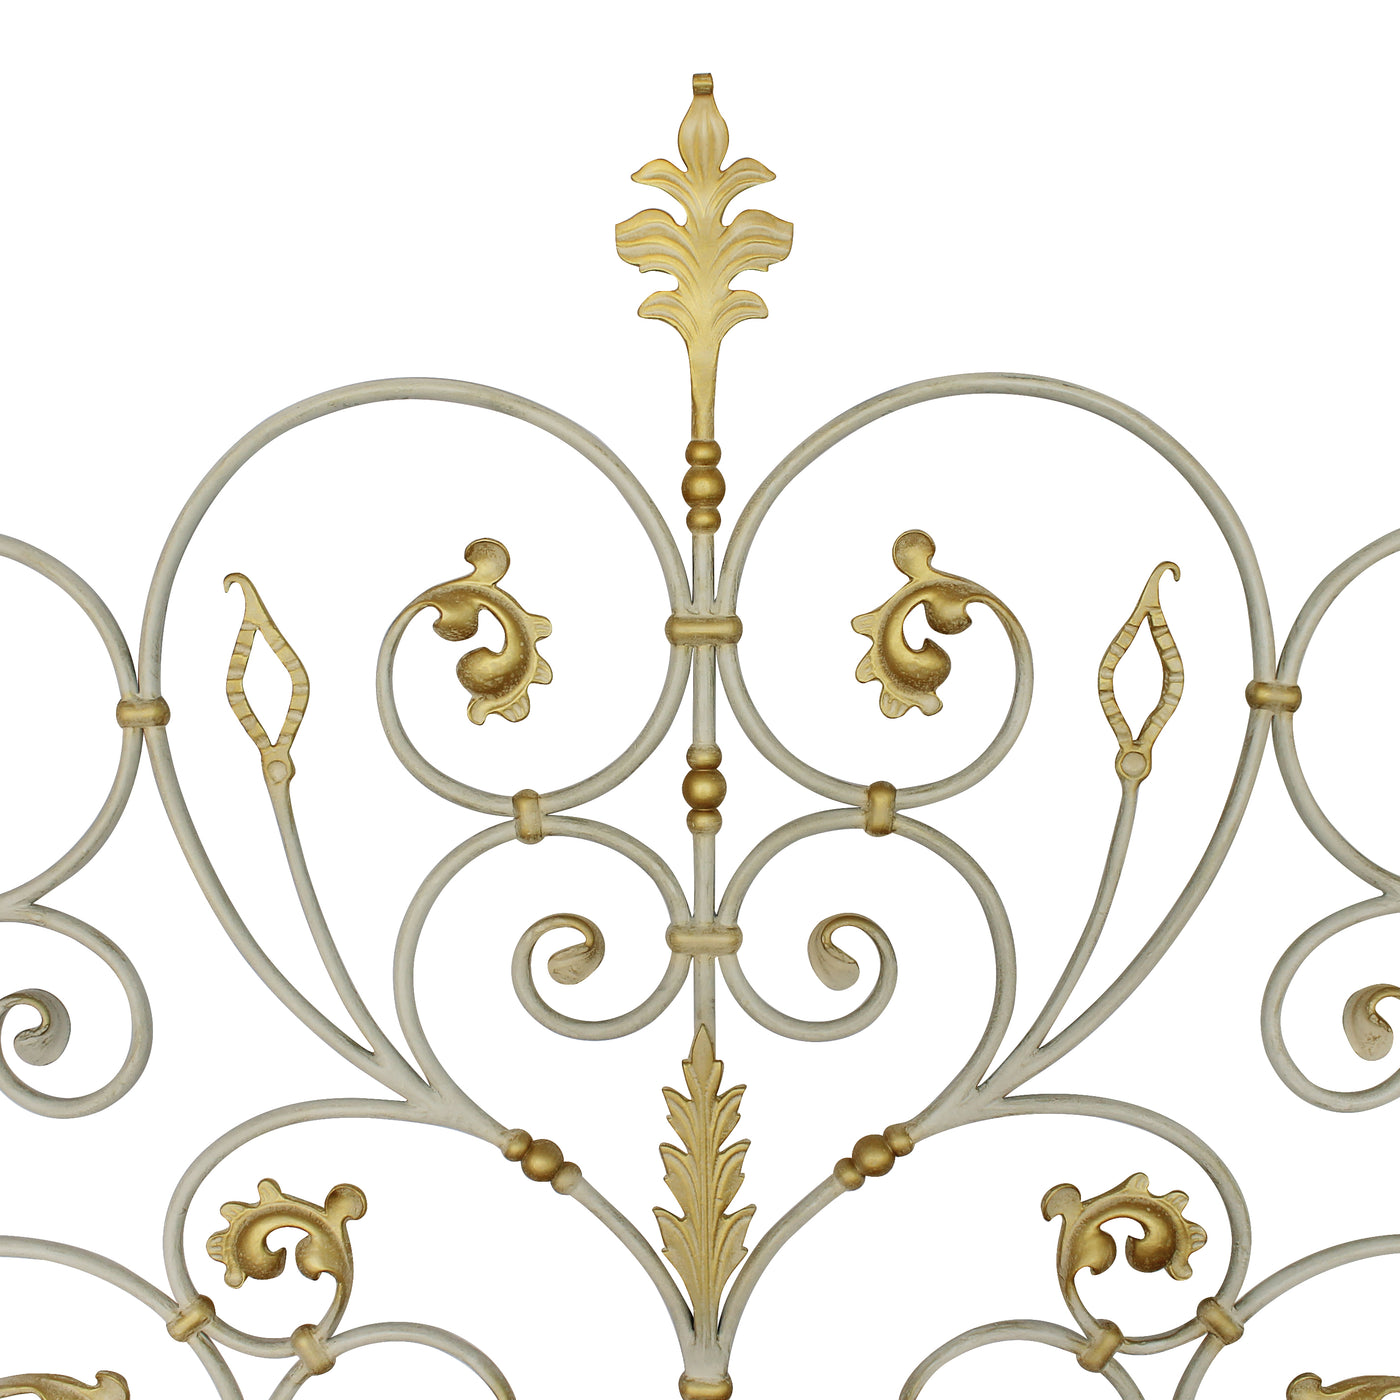 Close up of a classic metal headboard made up of scrolls and leaves, painted in an antique white finish